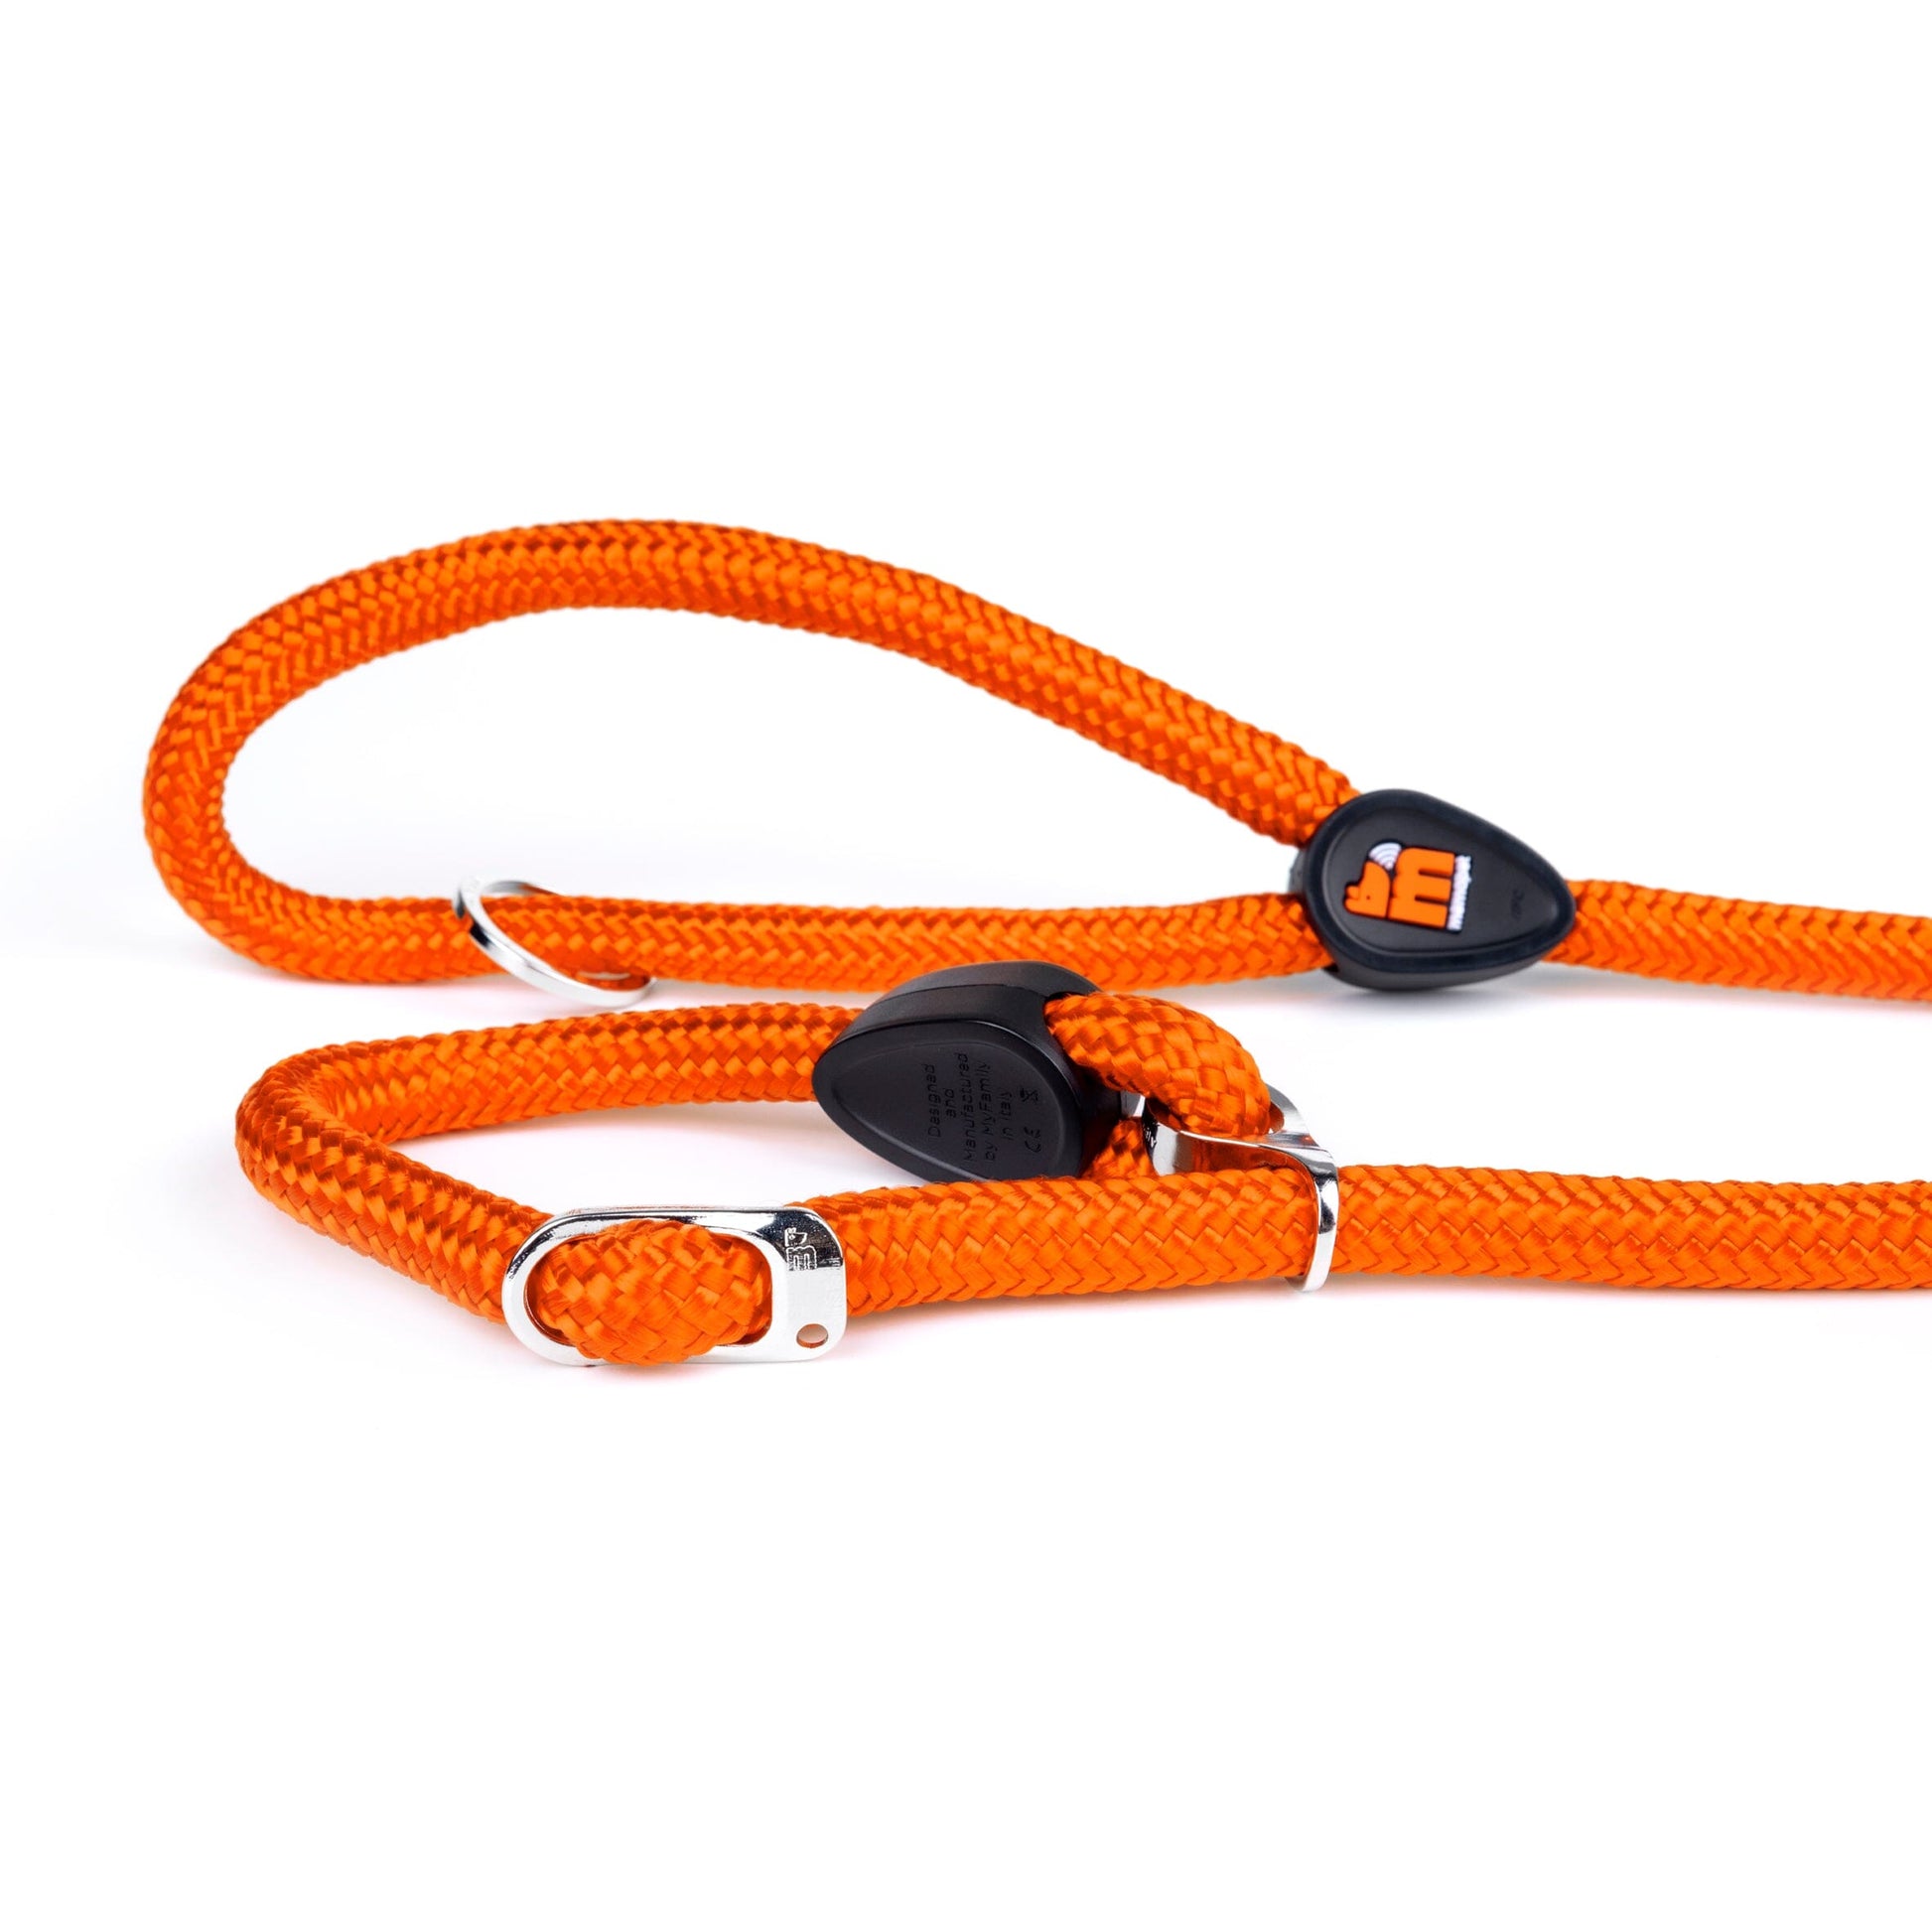 Memopet Dog Training Collar and Rope Leash 2in1 With Activity Tracking Device and Digital ID Pet Supplies My Family Medium Orange 